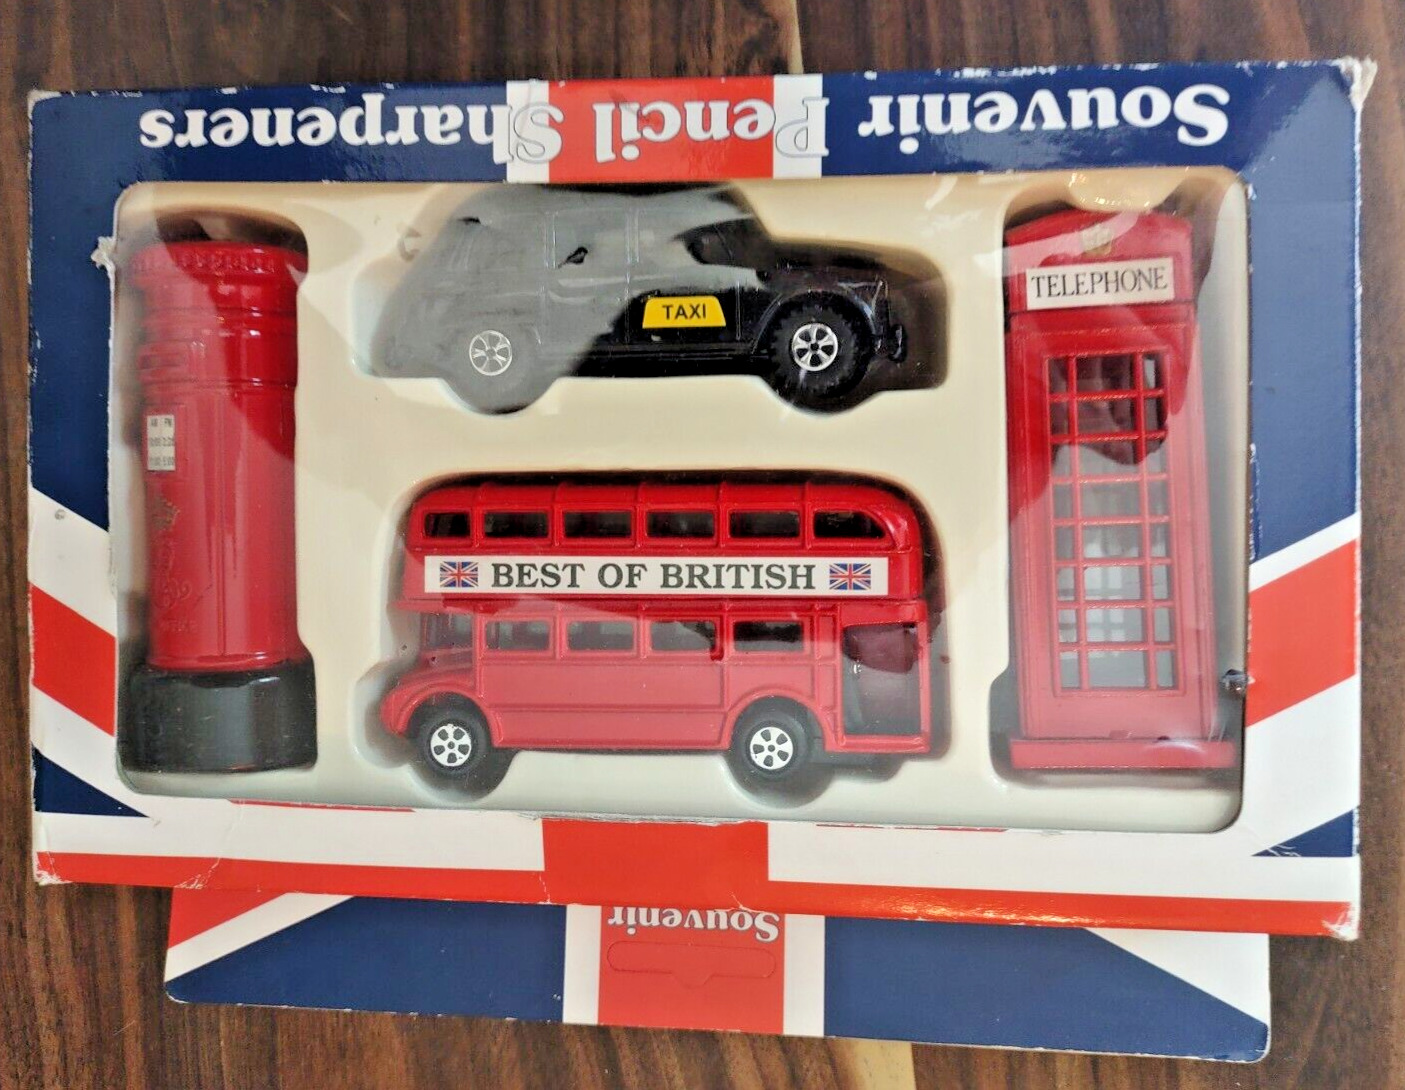 SET OF 4 LONDON STREET SCENE DIE CAST PENCIL SHARPENERS TAXI BUS PHONE BOOTH